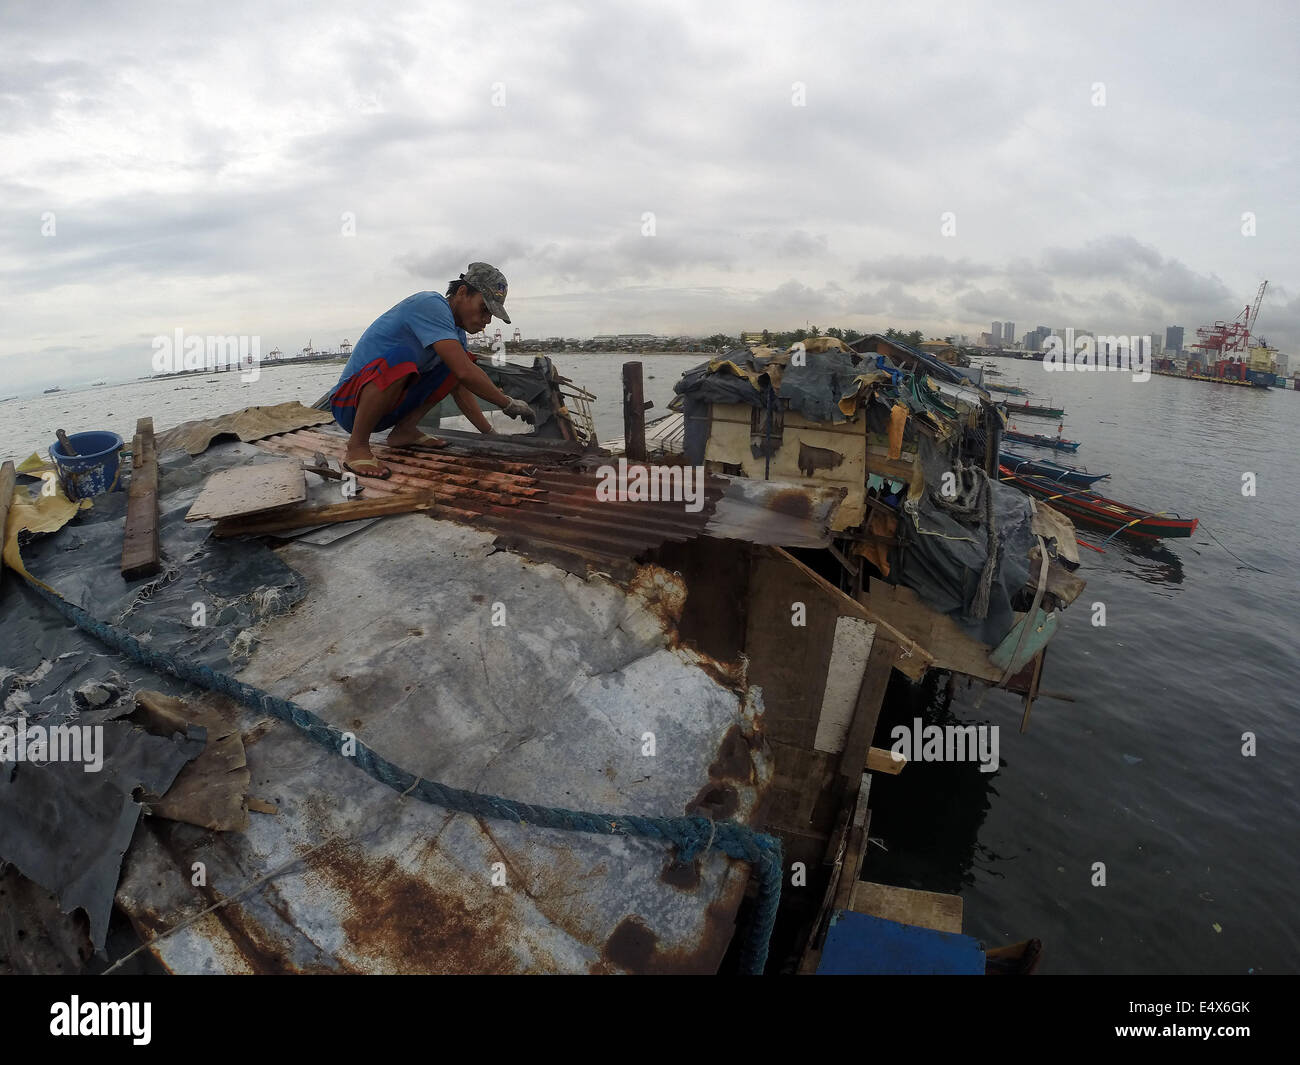 Manila, Philippines. 17th July, 2014. A man repairs the roof of his home after it was damaged by typhoon Rammasun at a slum area in Manila, the Philippines, on July 17, 2014. The death toll from typhoon Rammasun rose to 38, the local disaster agency said Thursday. The National Disaster Risk Reduction and Management Council (NDRRMC) said the typhoon also left 10 people injured while eight others were declared missing. Credit:  Rouelle Umali/Xinhua/Alamy Live News Stock Photo